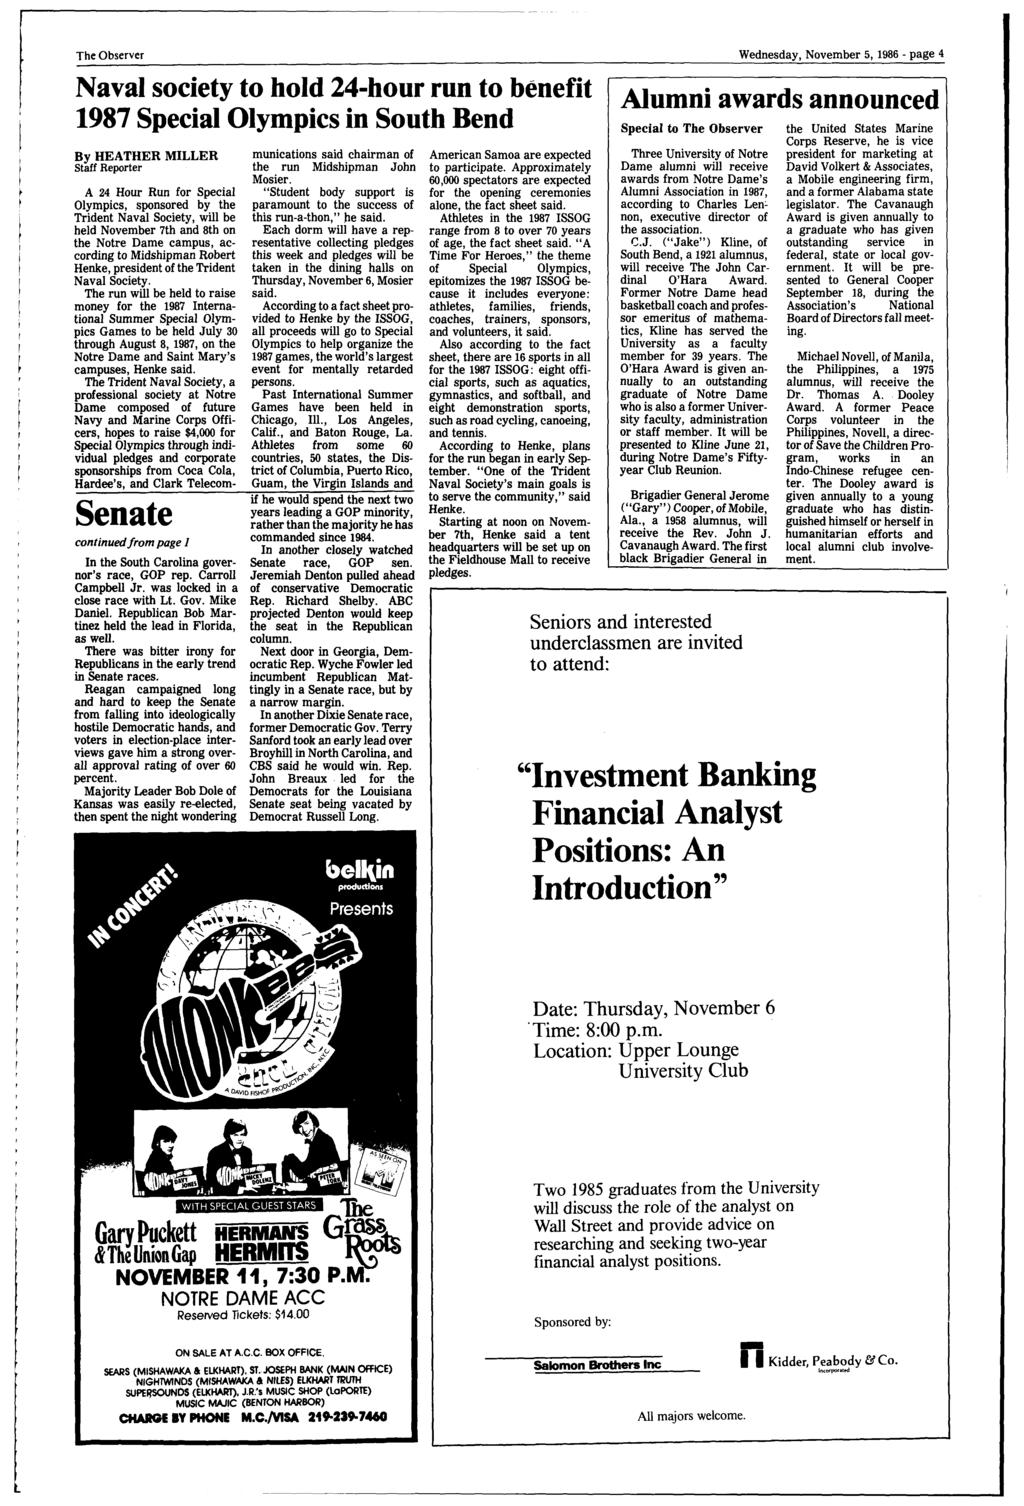 The Observer Wednesday, November 5, 1986- page 4 Naval sociey o hold 24-hour run o benefi 1987 Special Olympics in Souh Bend By HEATHER MILLER Saff Reporer A 24 Hour Run for Special Olympics,